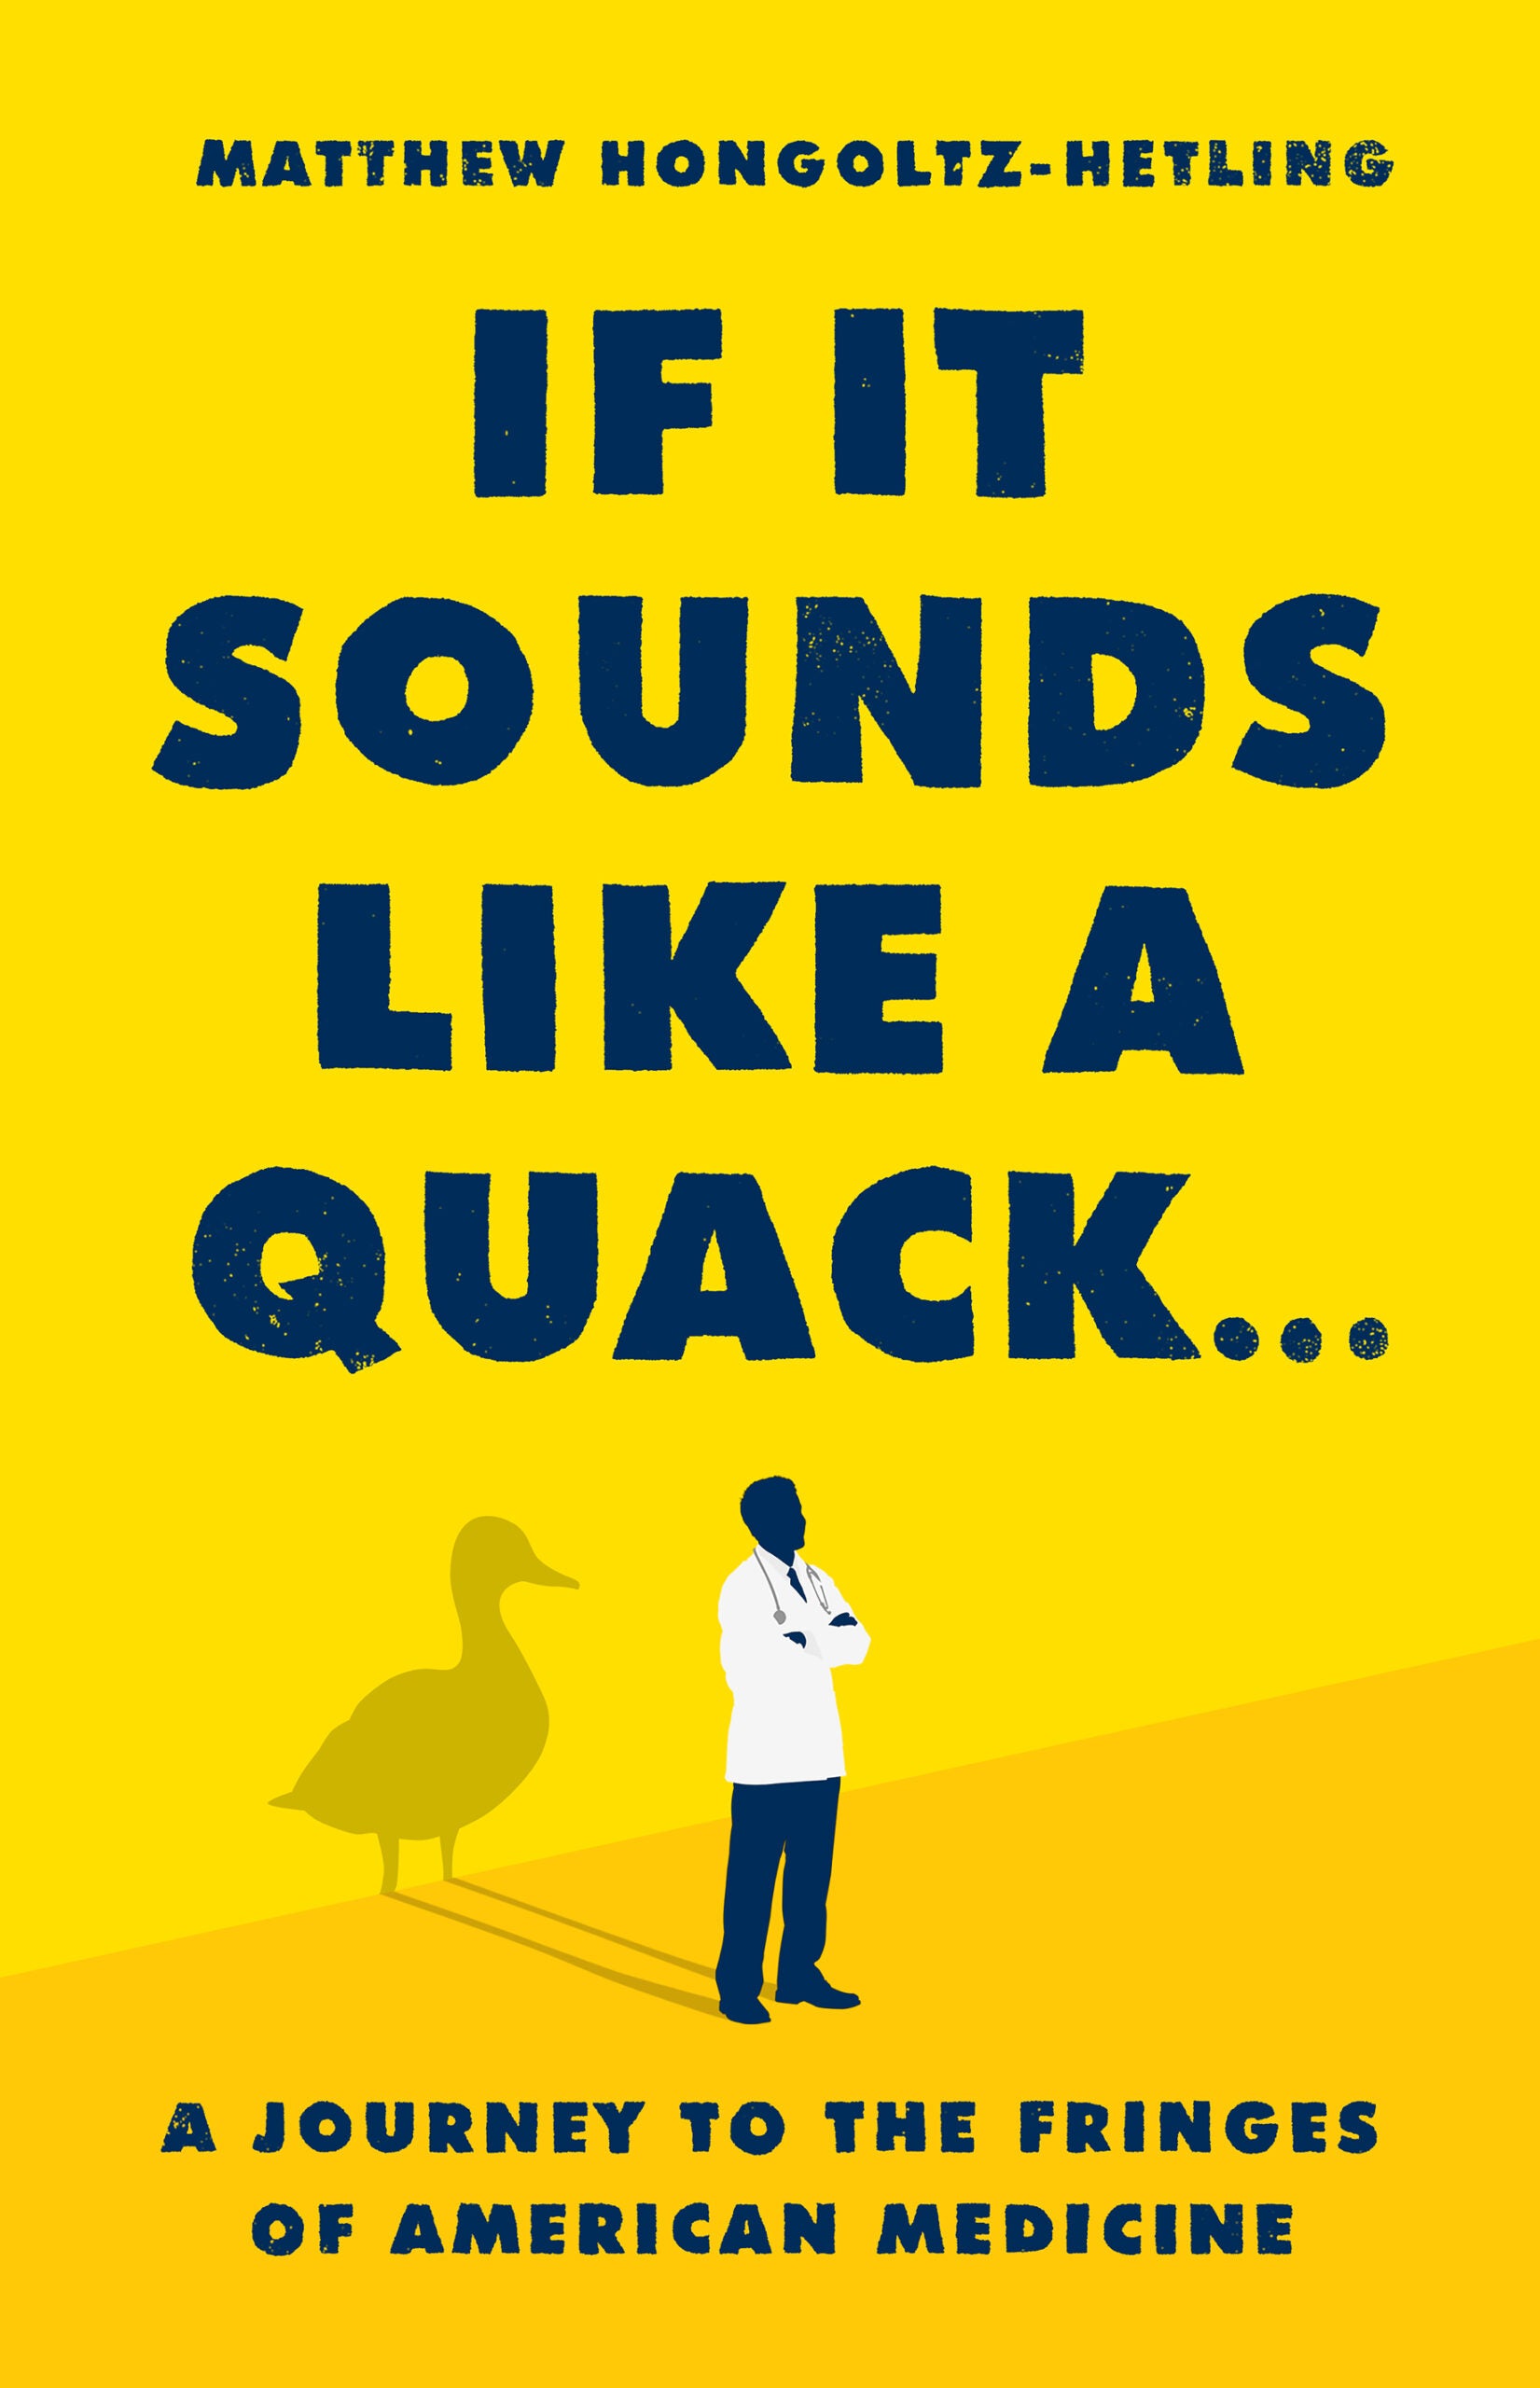 If it sound like a quack book cover, doctor and duck silhouette, light yellow with navy all caps text